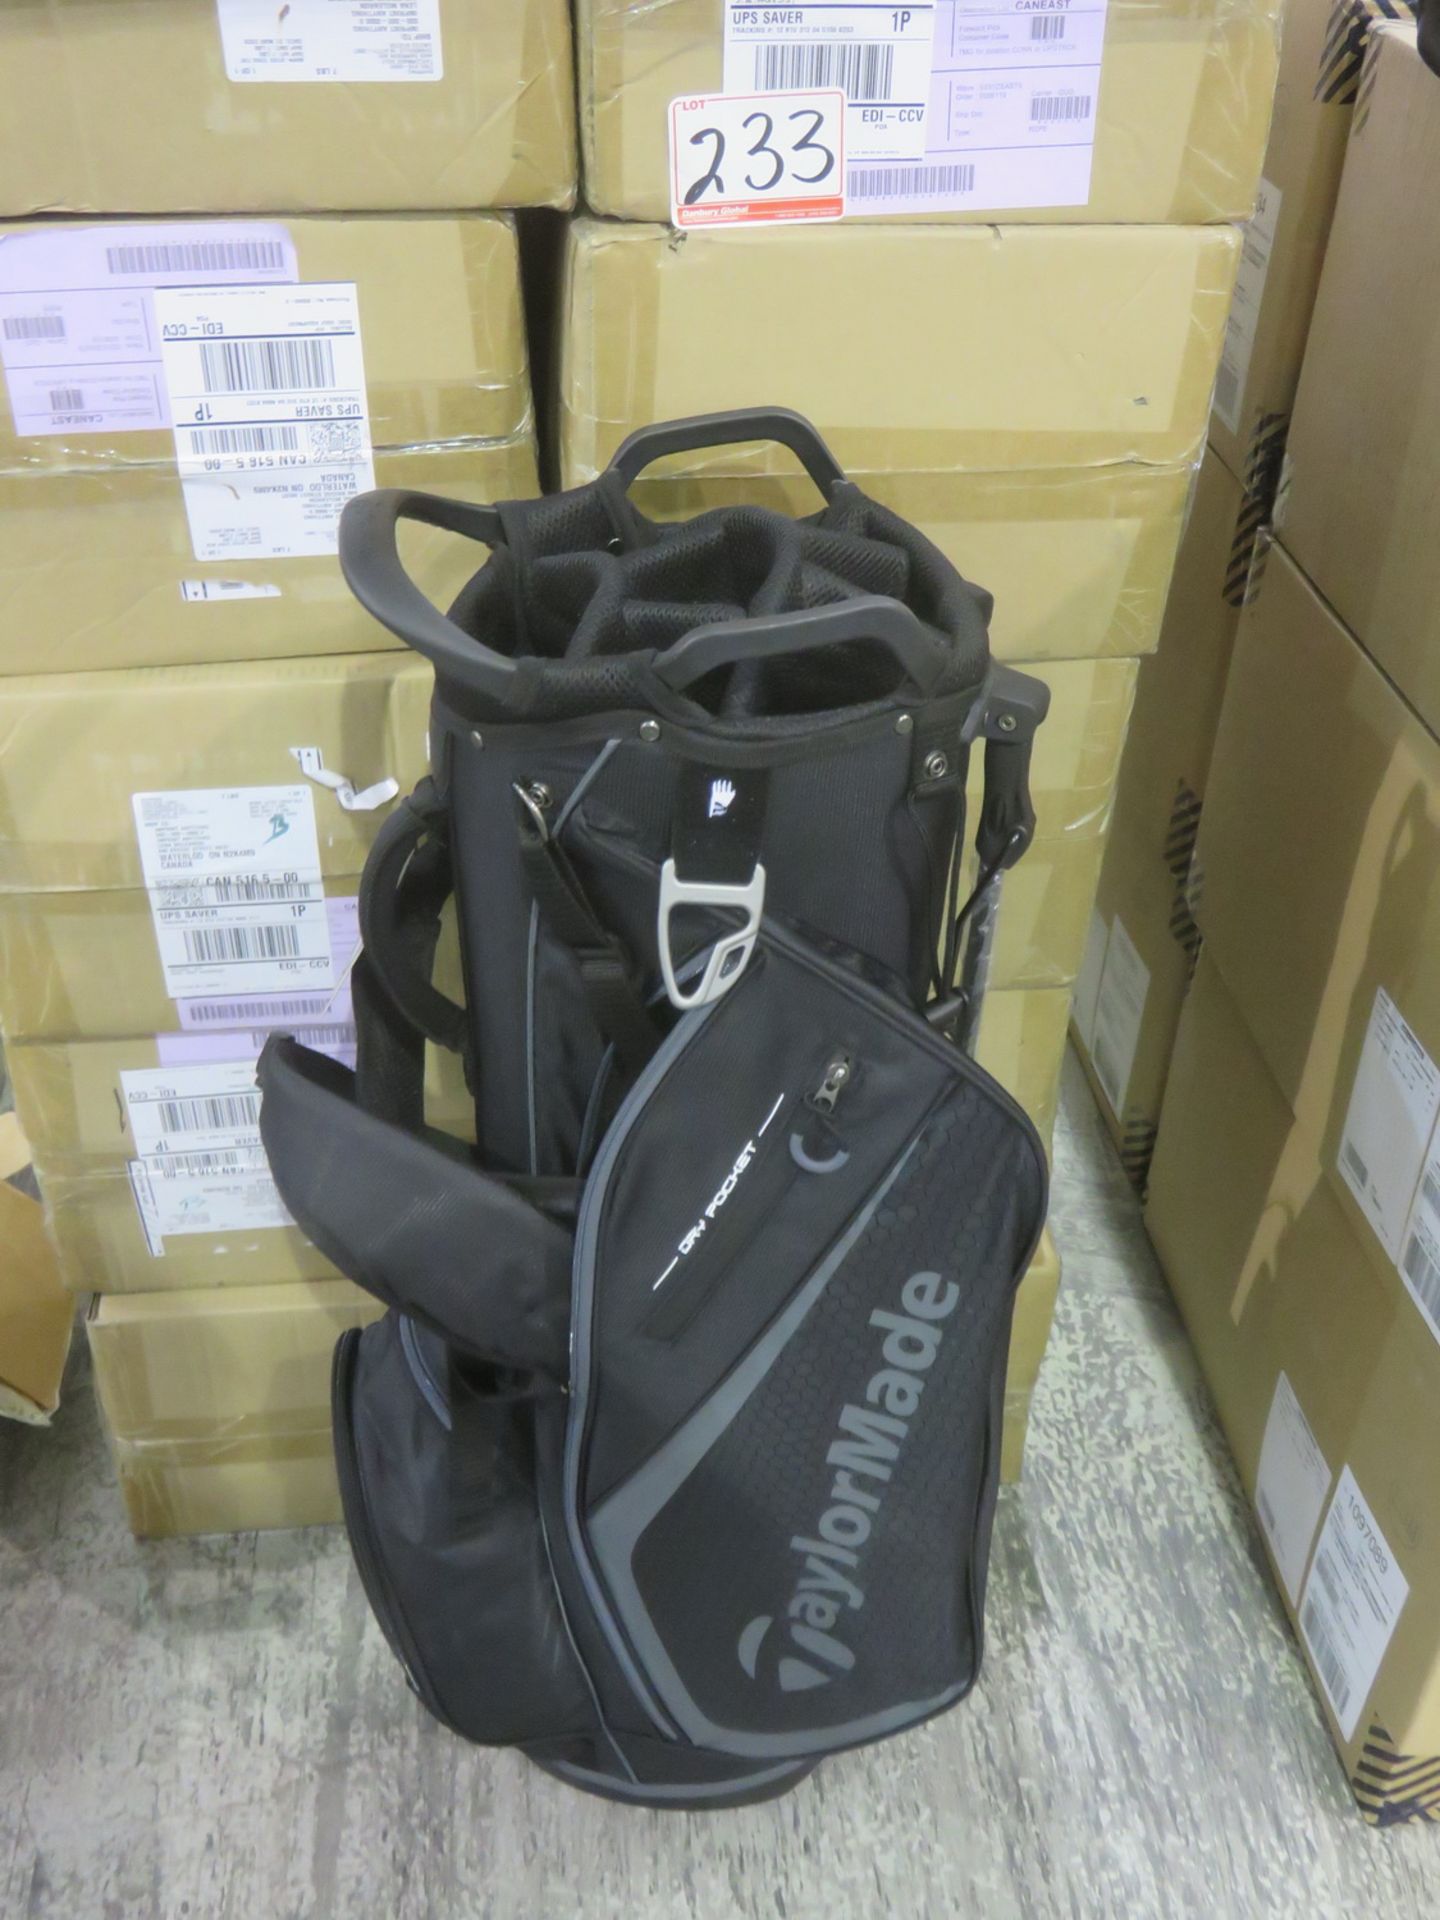 TAYLORMADE BLACK TM19 SELECT PLUS GOLF STAND (CARRY) BAG - NEW IN BOX